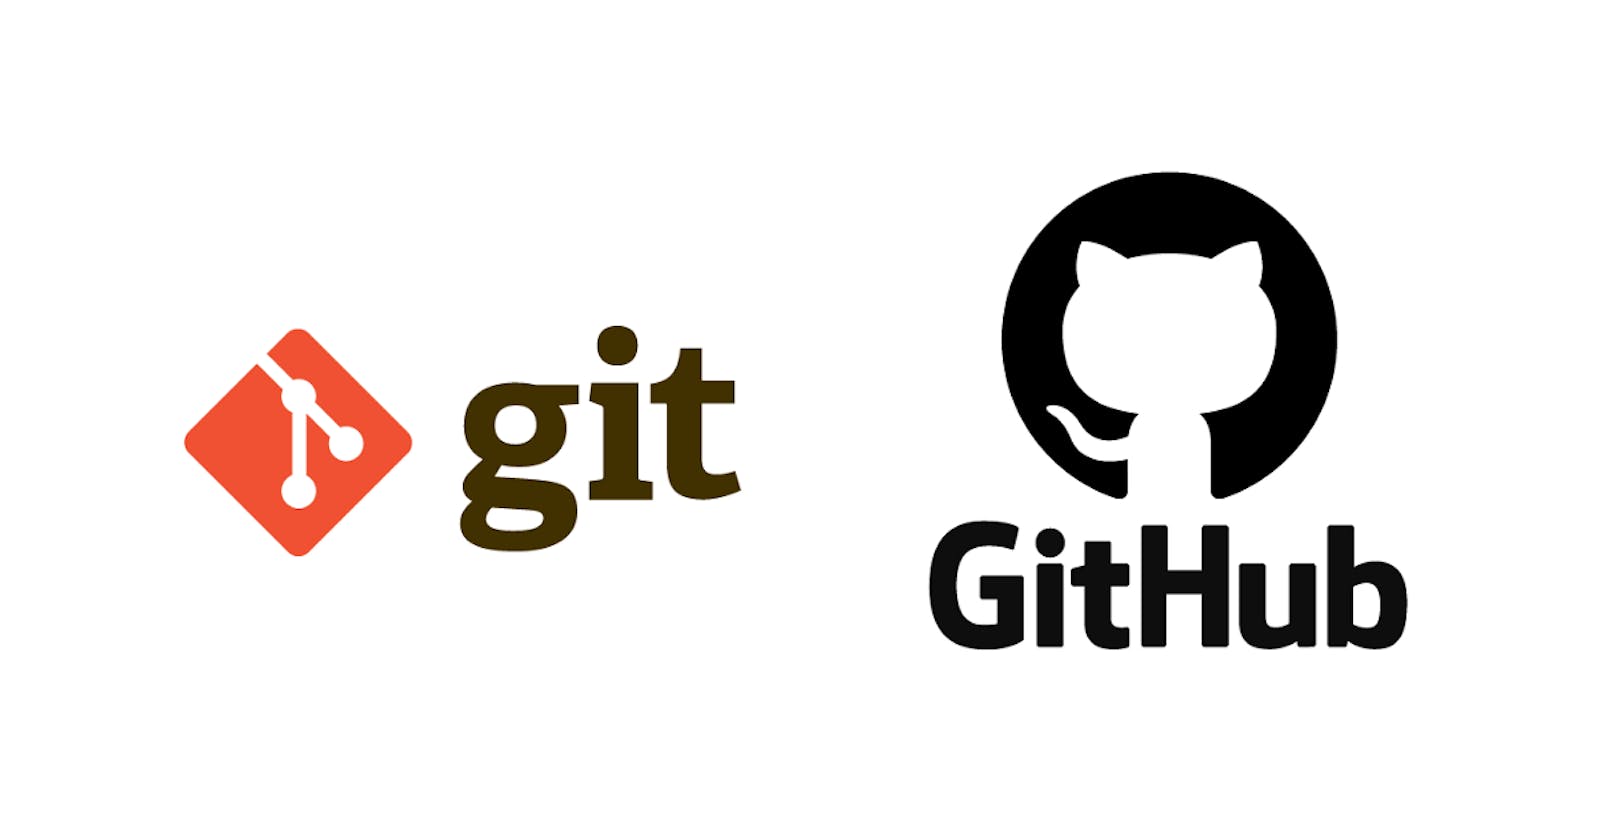 Chapter 1: GIT - Concepts